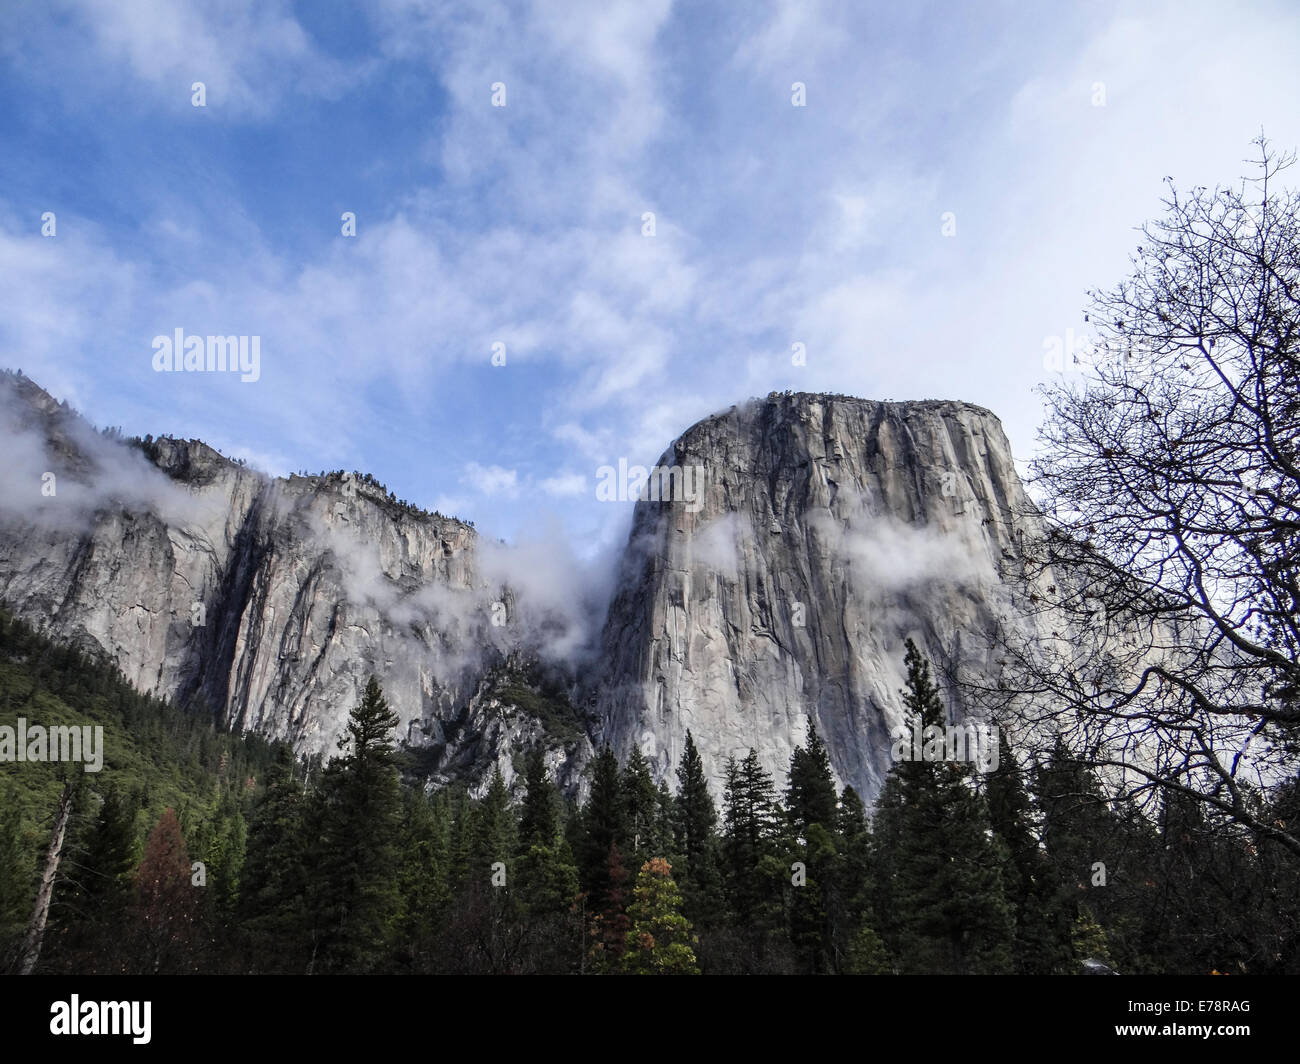 El Capitan, a granite monolith, rises about 3,000 ft from the valley floor at Yosemite National Park. Stock Photo